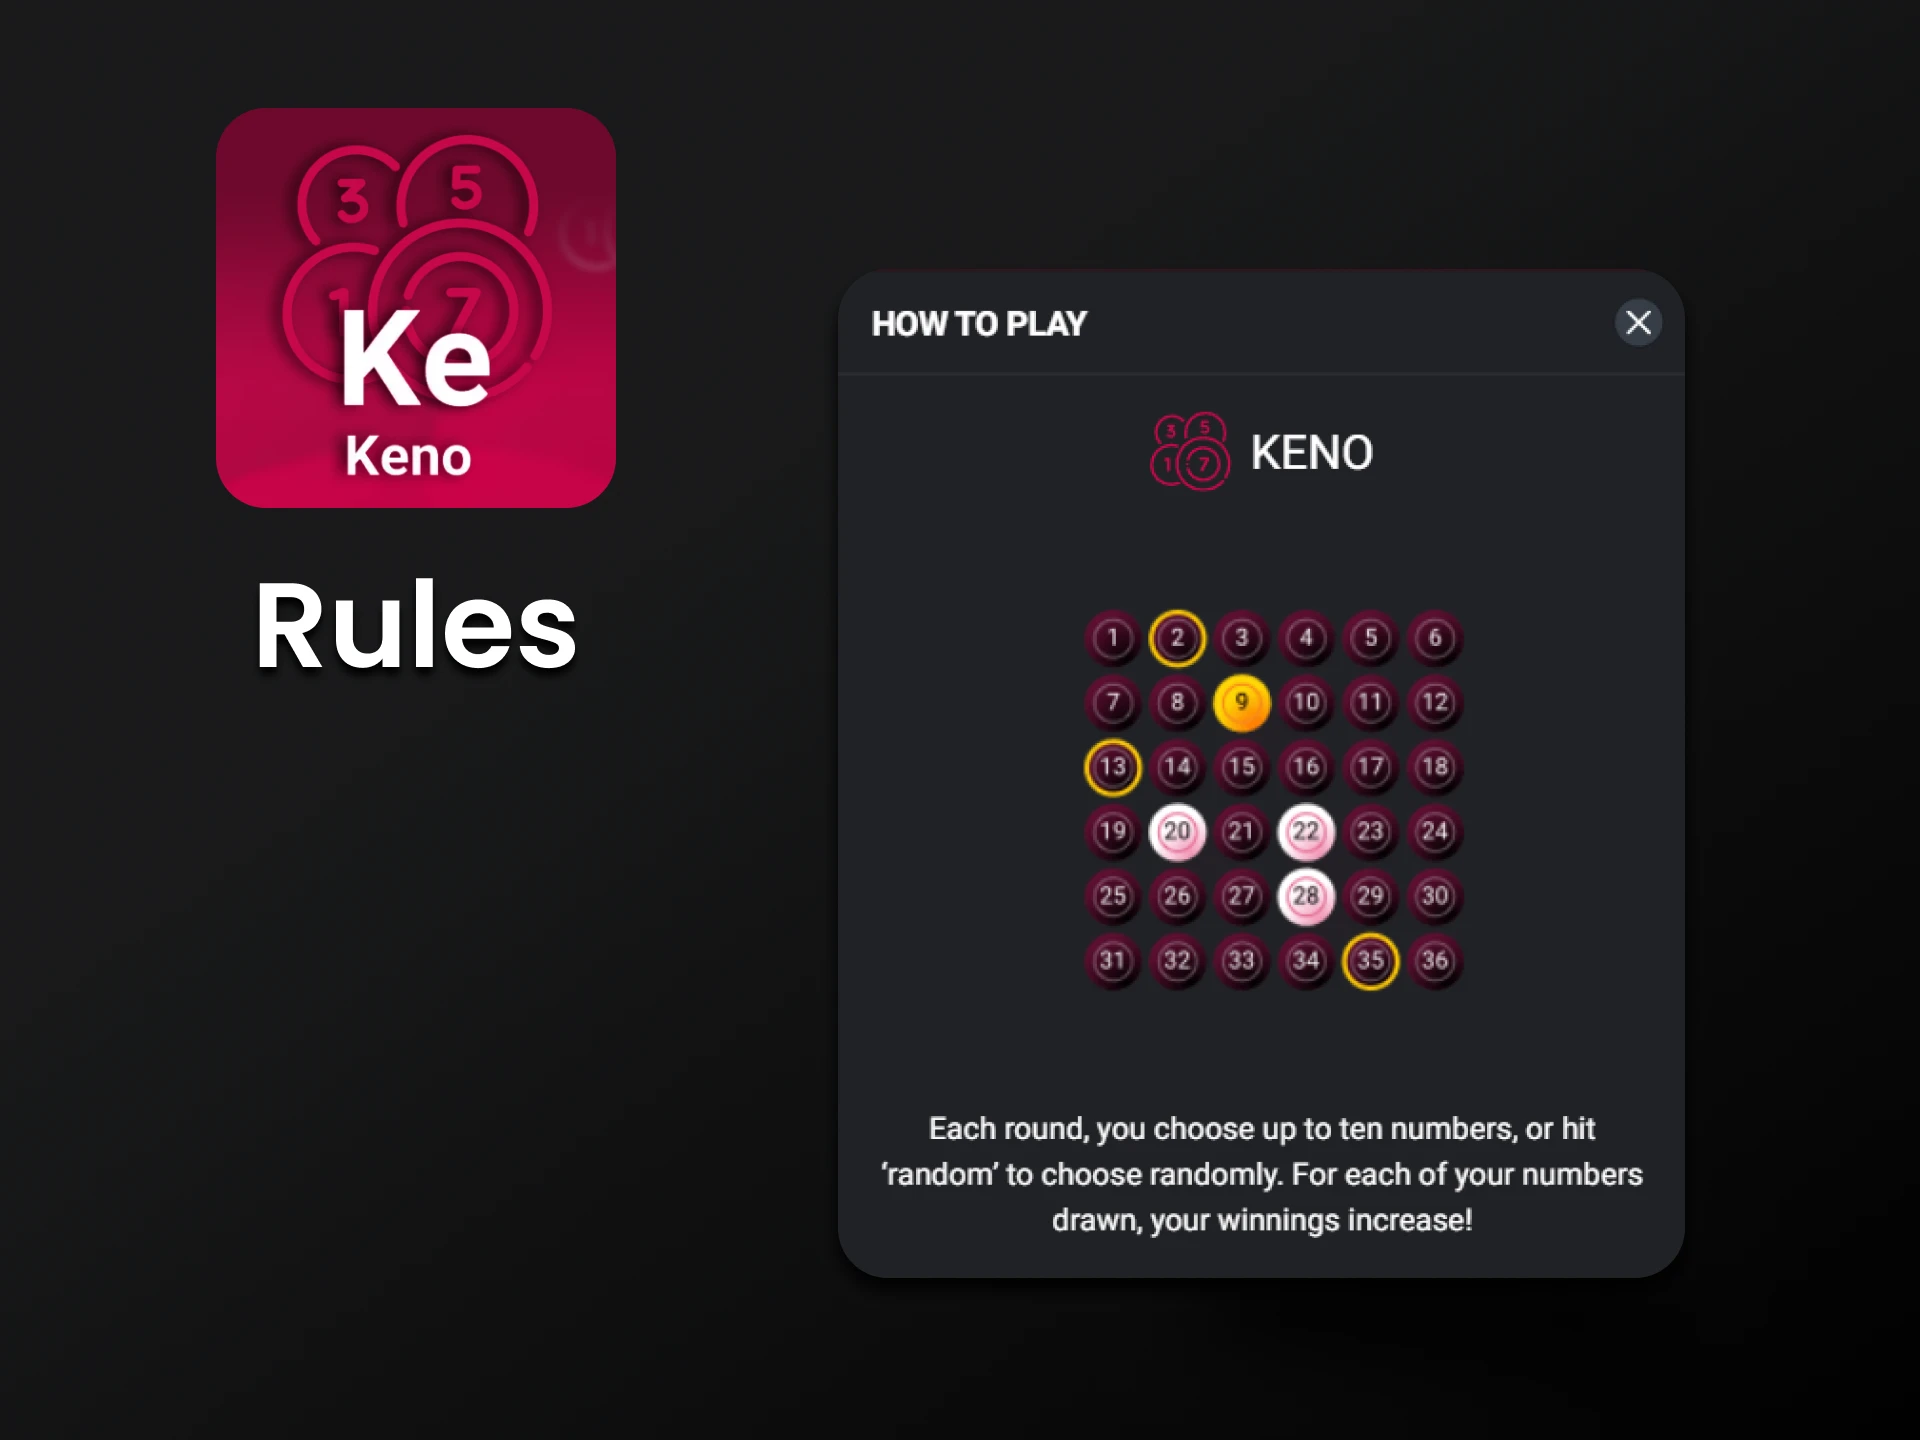 Learn about the rules of the Keno game.